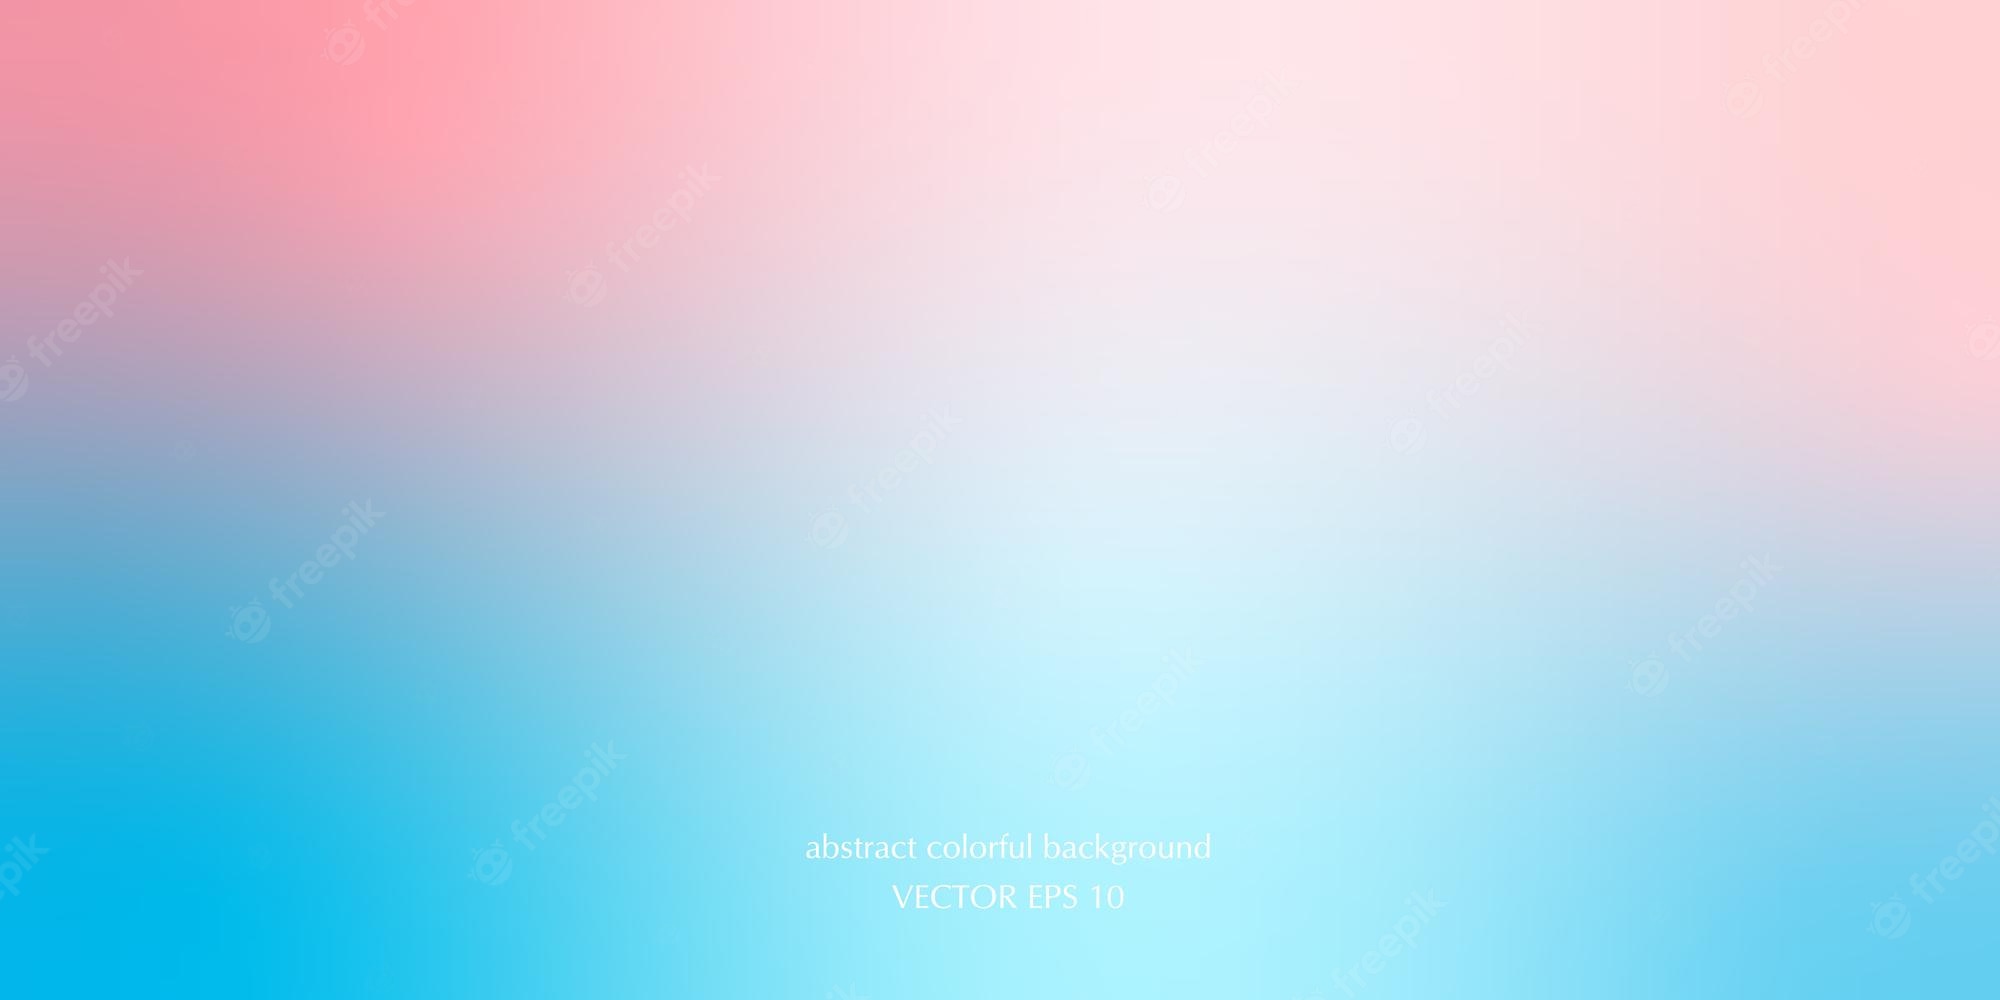 Premium Vector Abstract Colorful Background Blurred